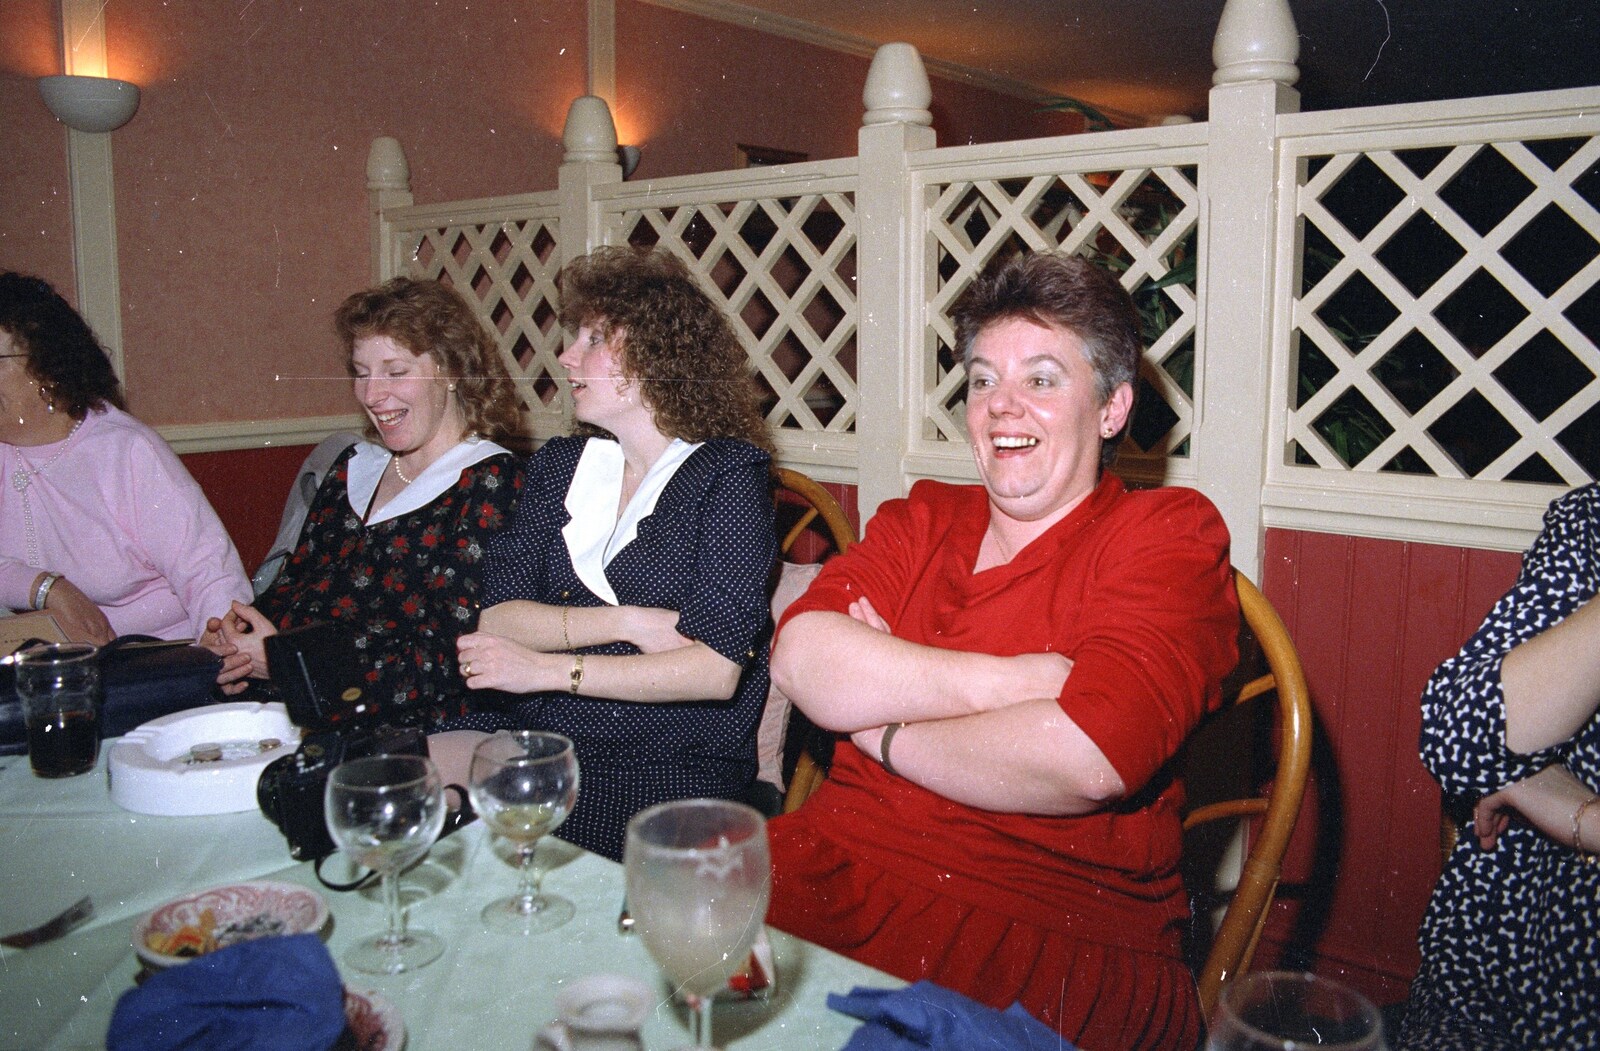 Crispy has a laff from Printec at the Park Hotel, Diss, Norfolk - 14th January 1992